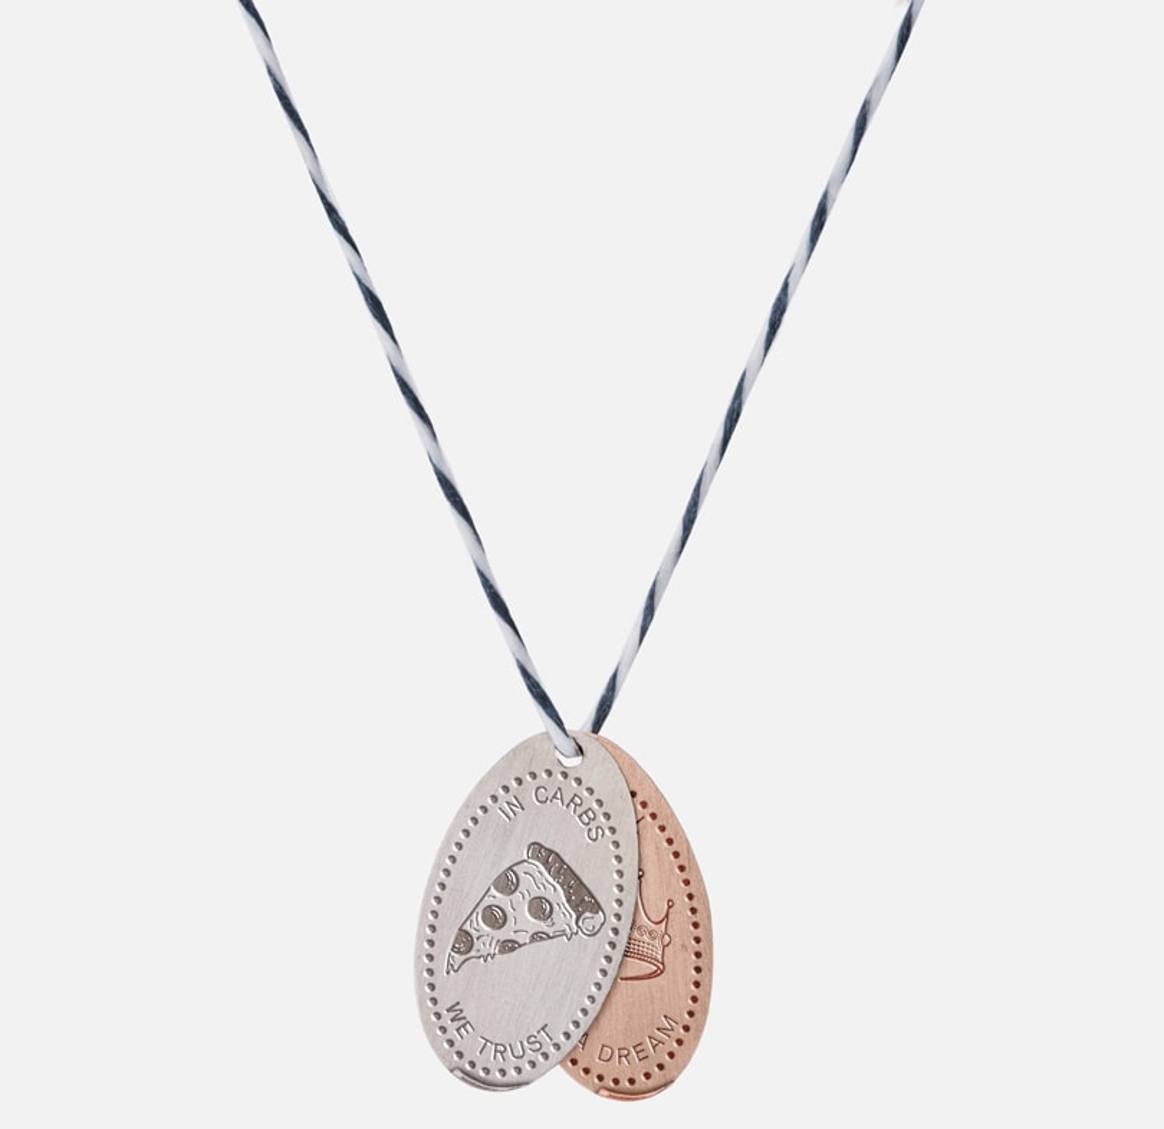 Miansai commemorates ten year anniversary with penny necklaces